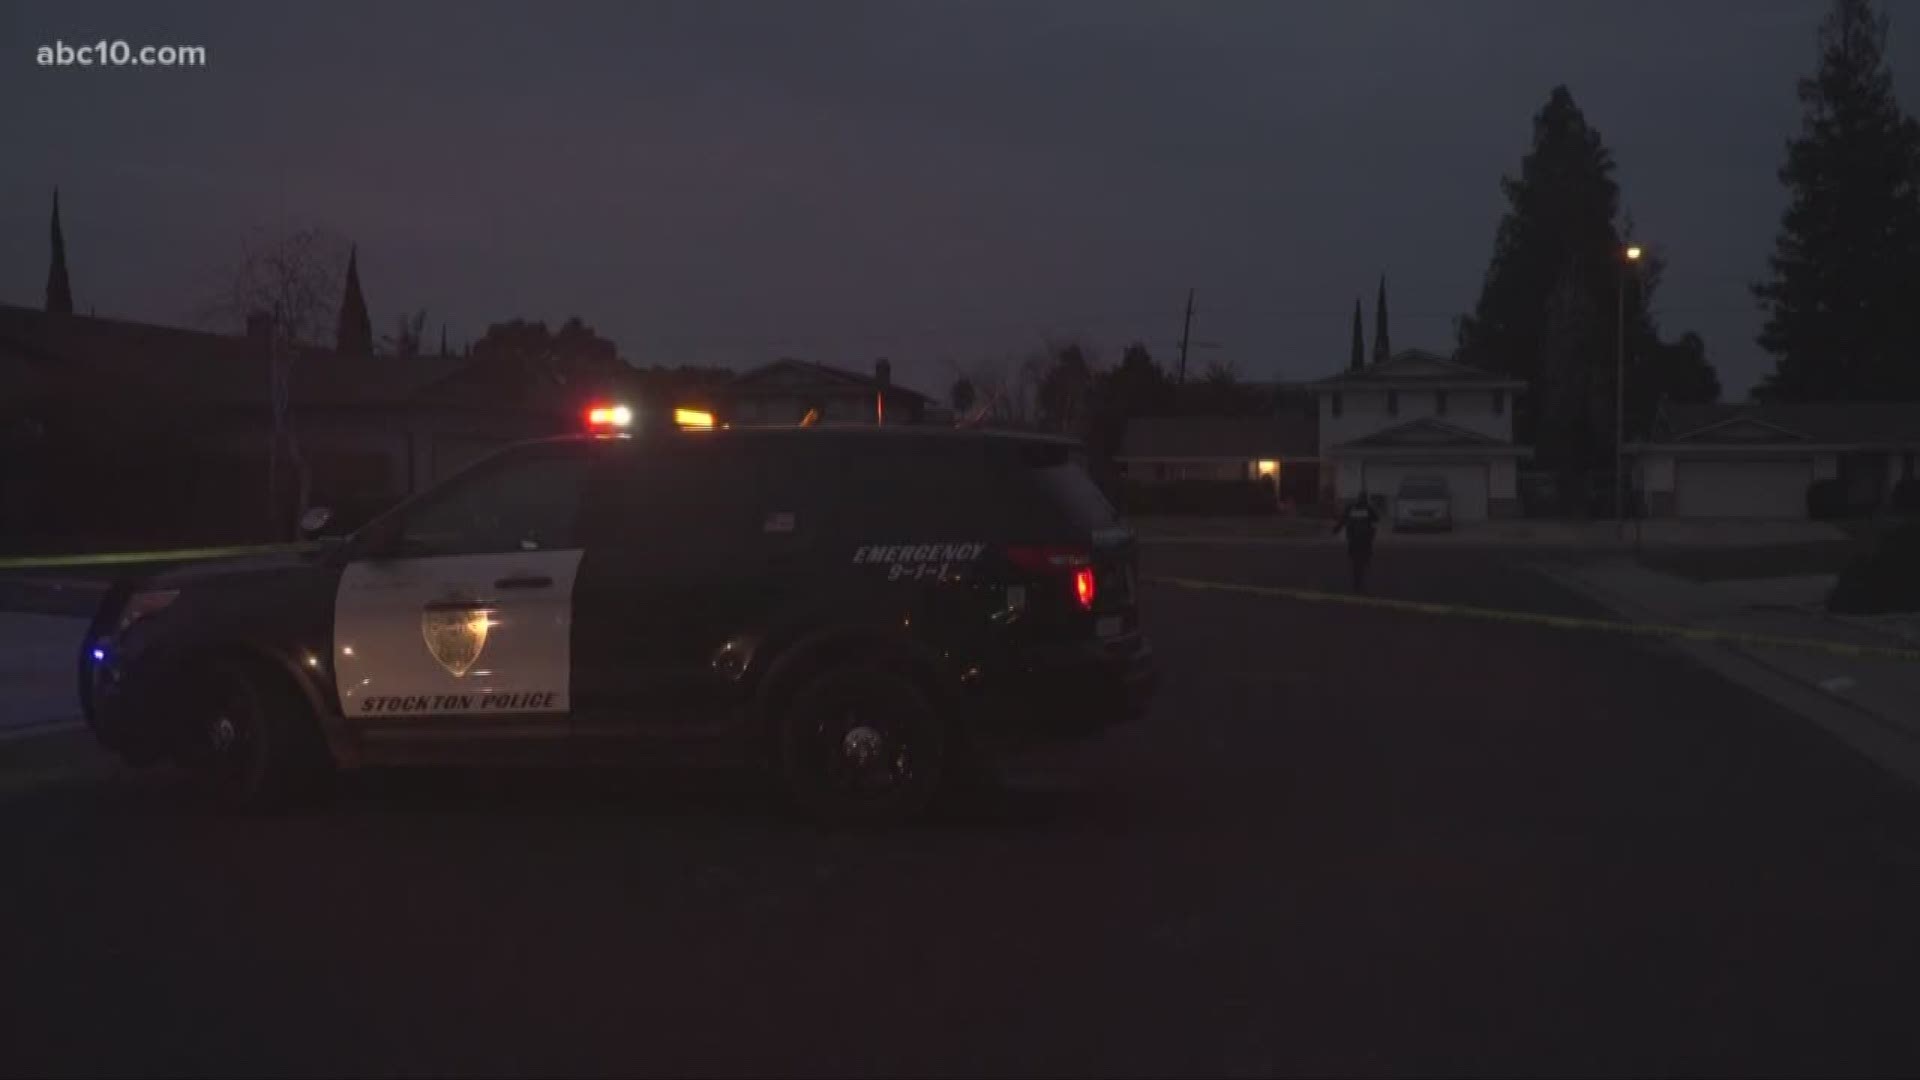 Stockton Police found the military explosives after investigating a death near Rockford Avenue and Richland Way at about 9:10 a.m on Thursday.